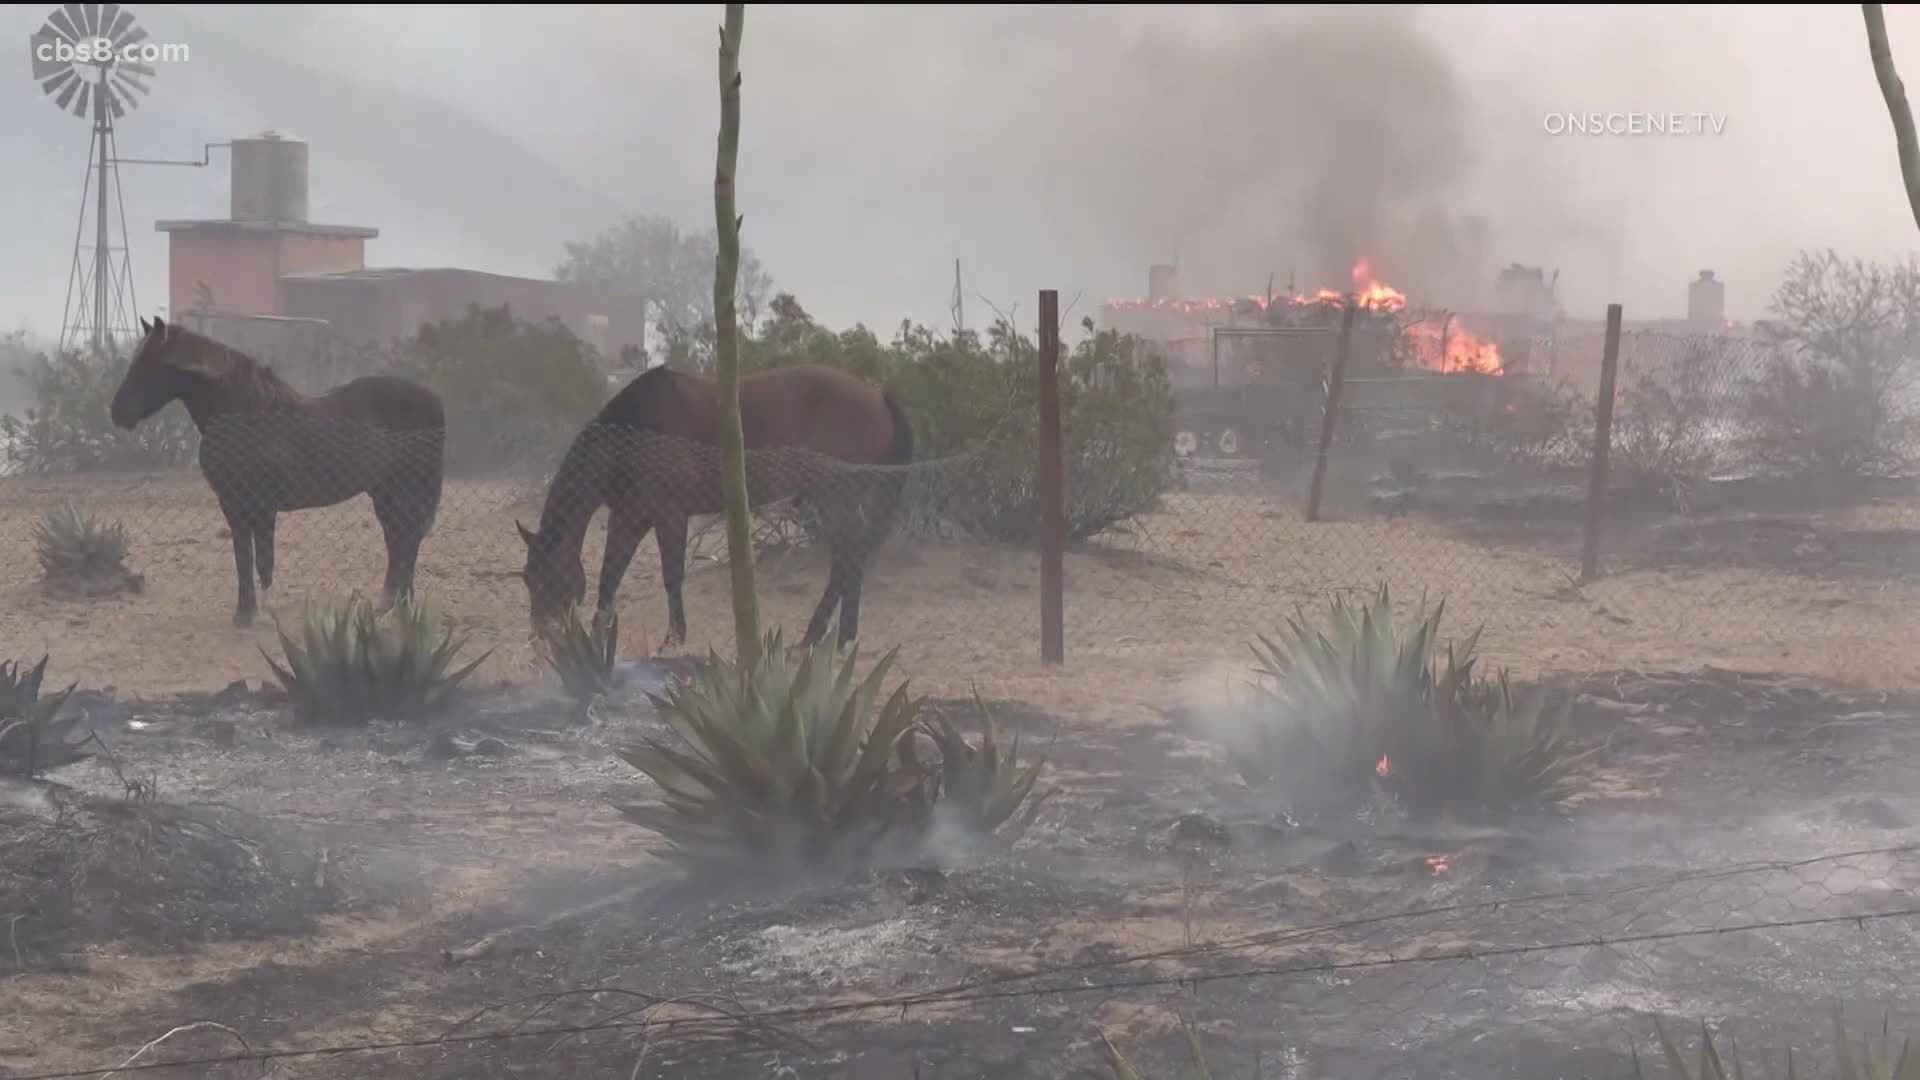 The vegetation fire started on Saturday evening and grew as strong winds of 40-60 mph helped fuel the flames.